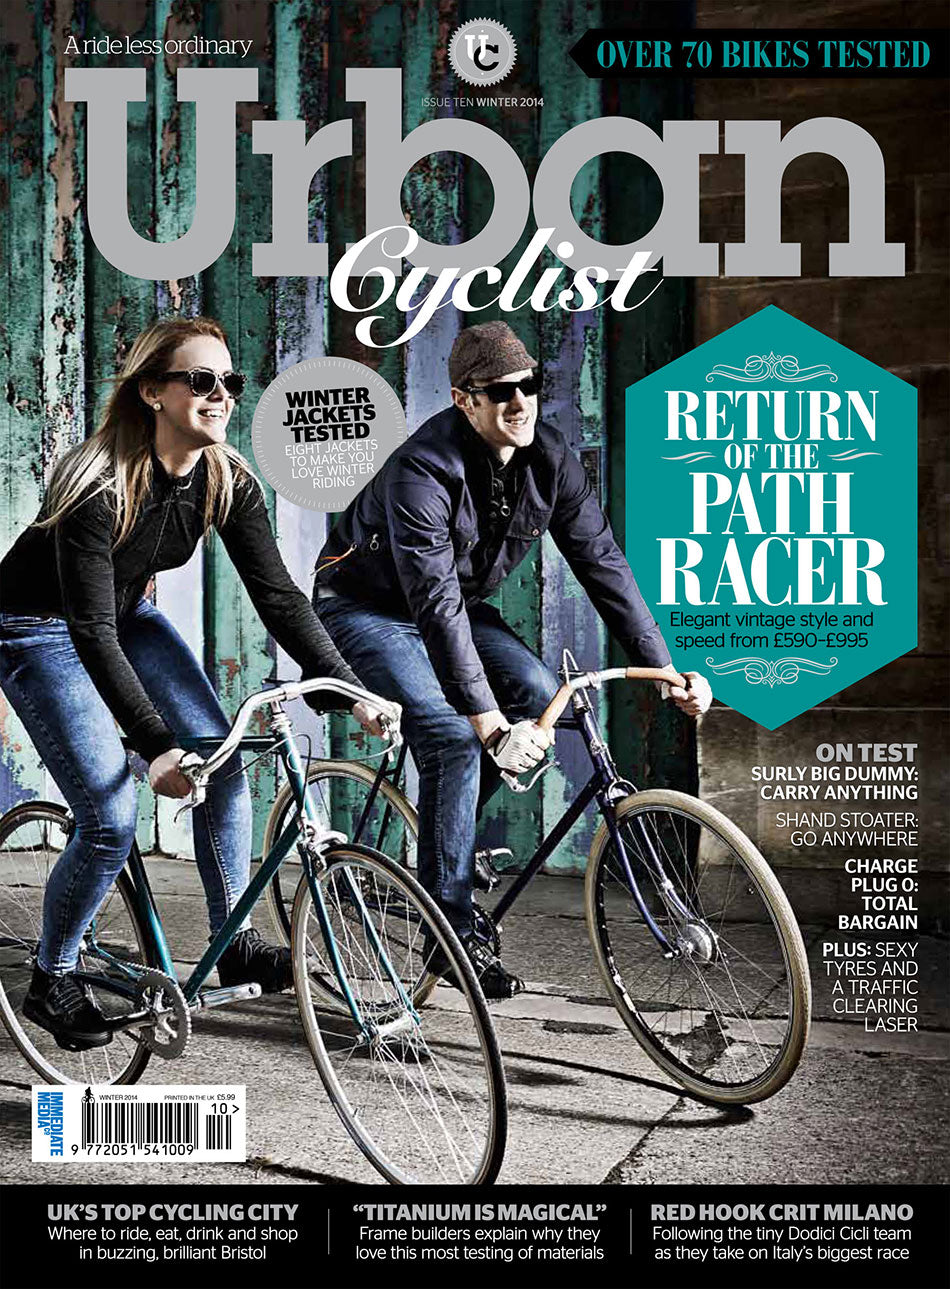 Urban Cyclist Magazine front cover issue 10 winter 2014.